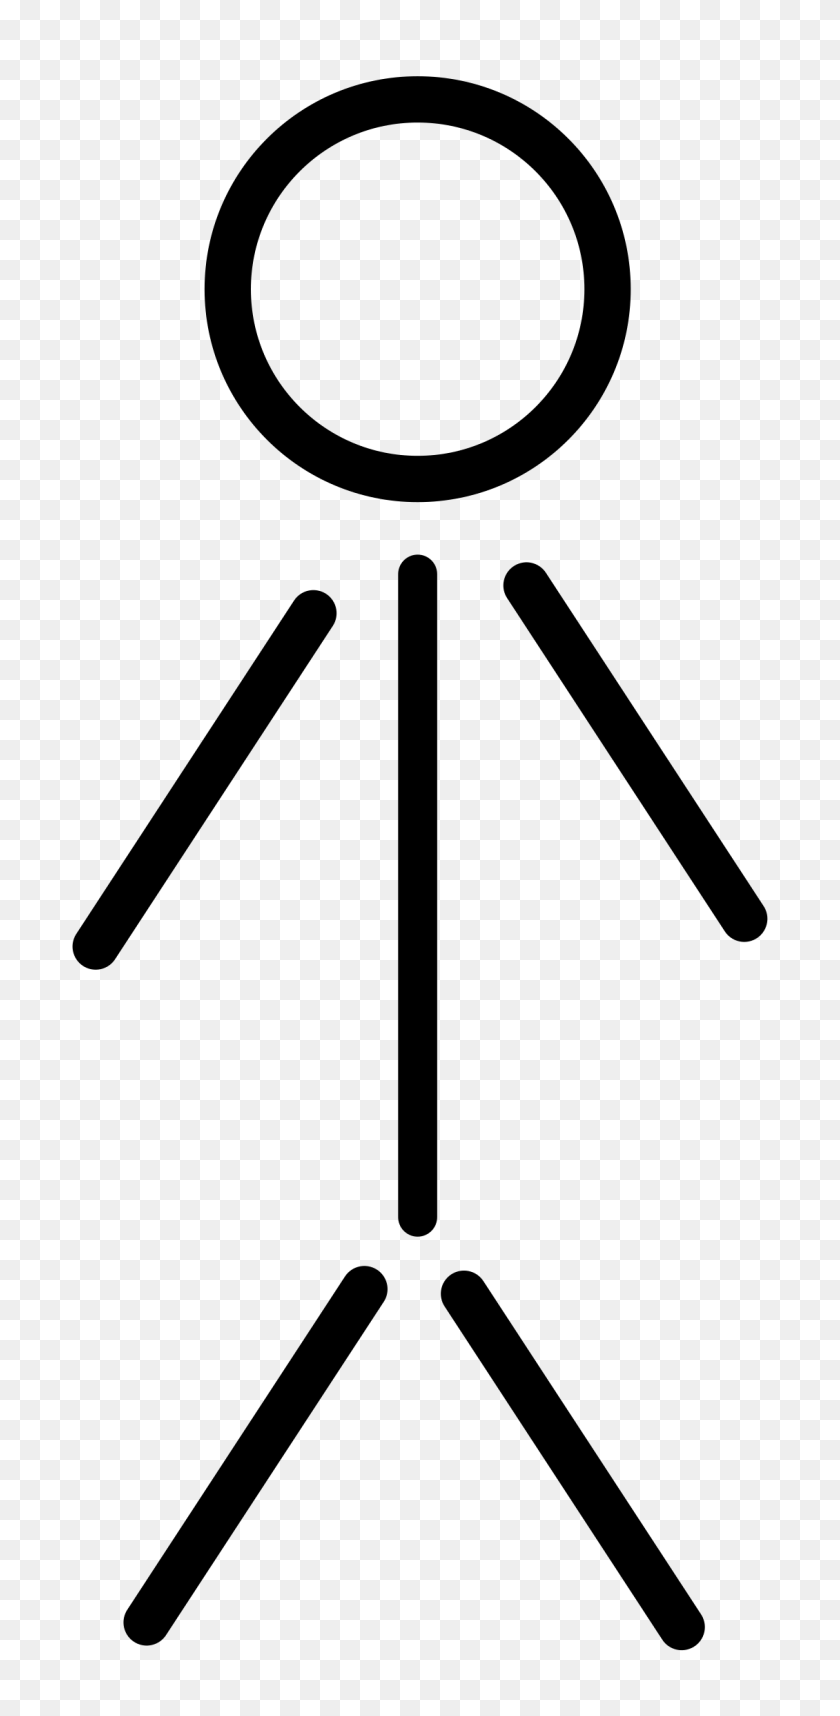 1130x2400 Sick Stick Man Drawings Sketchport - Sick Clipart Black And White